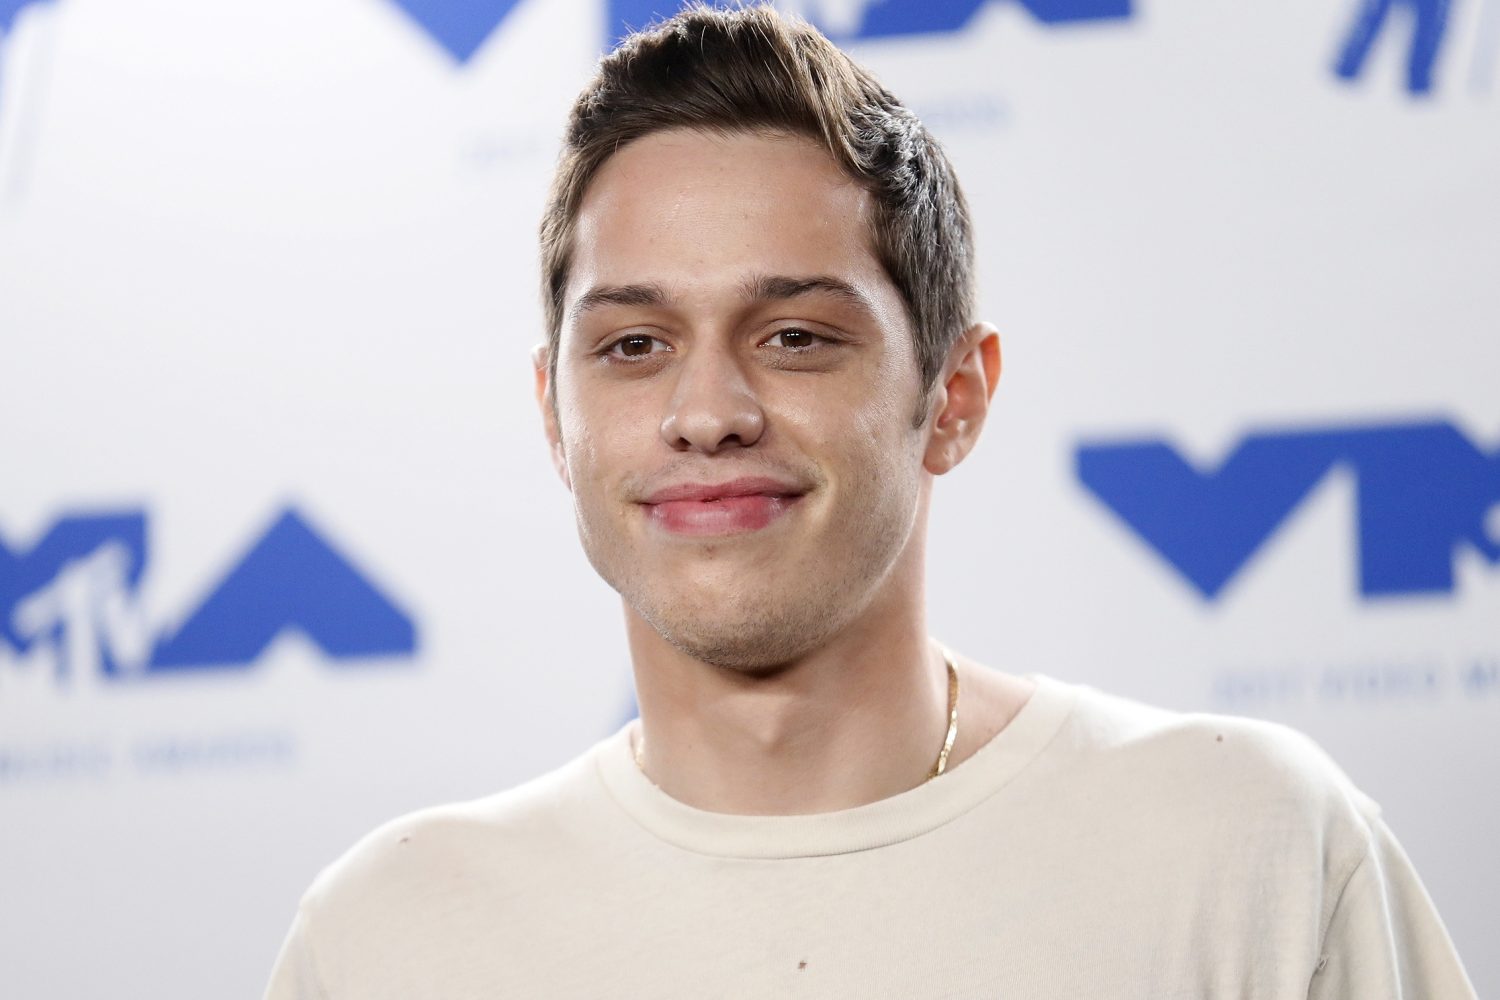 Pete Davidson Has Confirmed The Size Of His Manhood